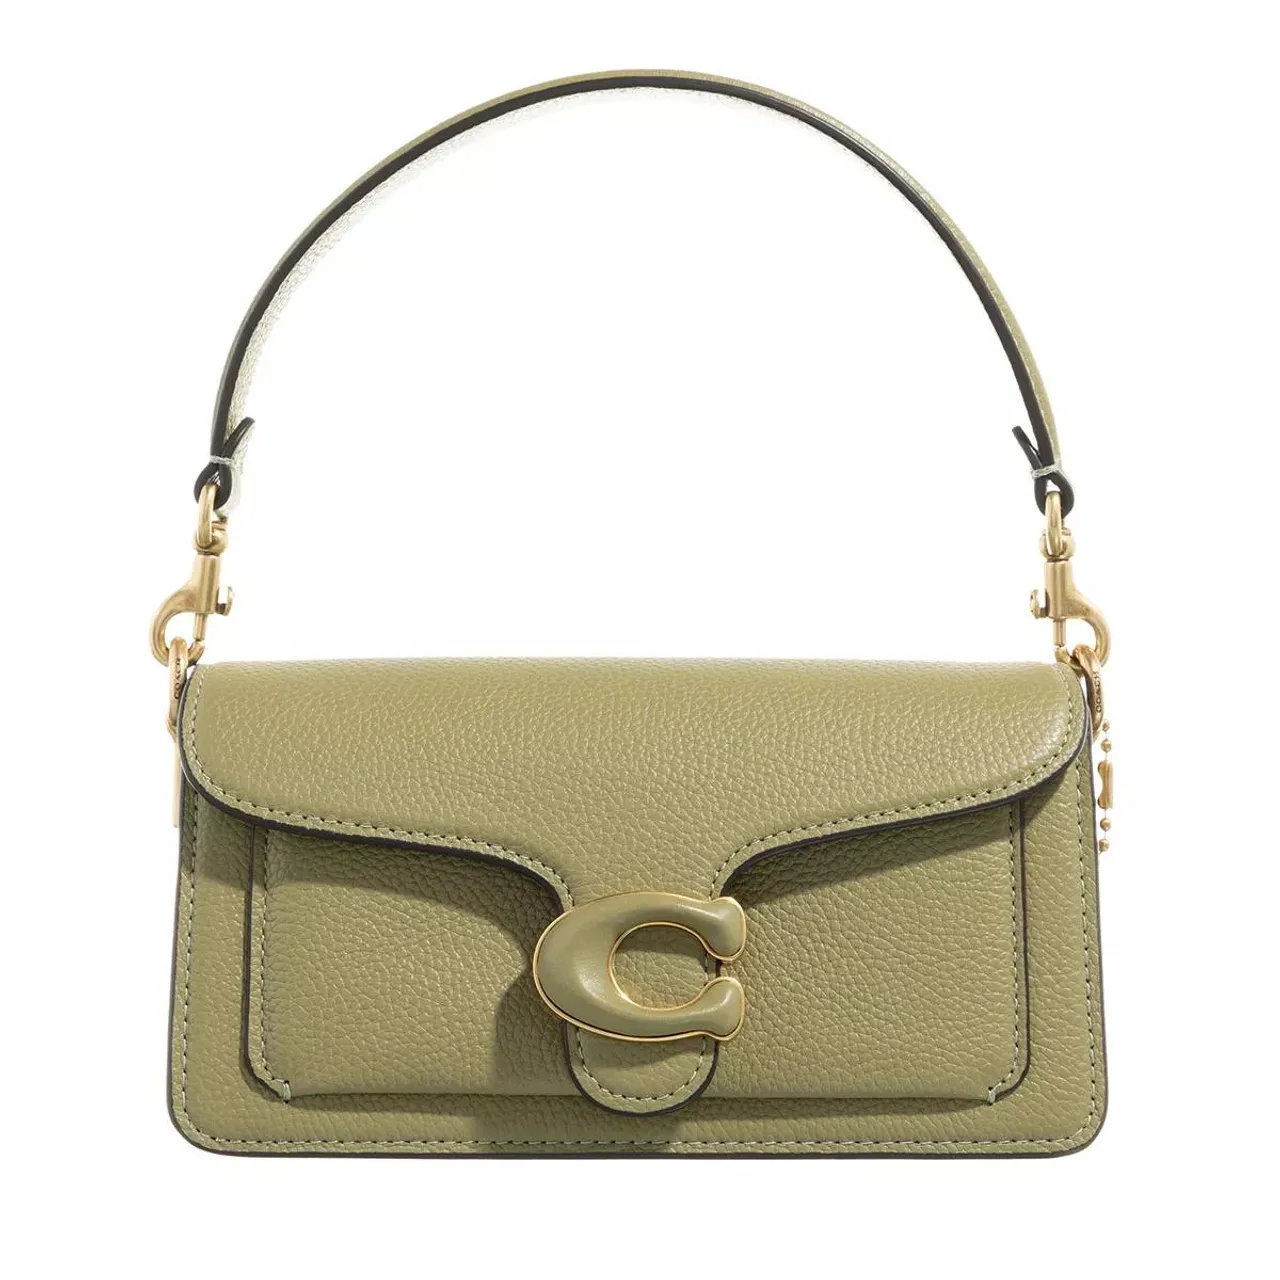 Coach Pochettes - Polished Pebble Leather Tabby Shoulder Bag - green - Pochettes for ladies